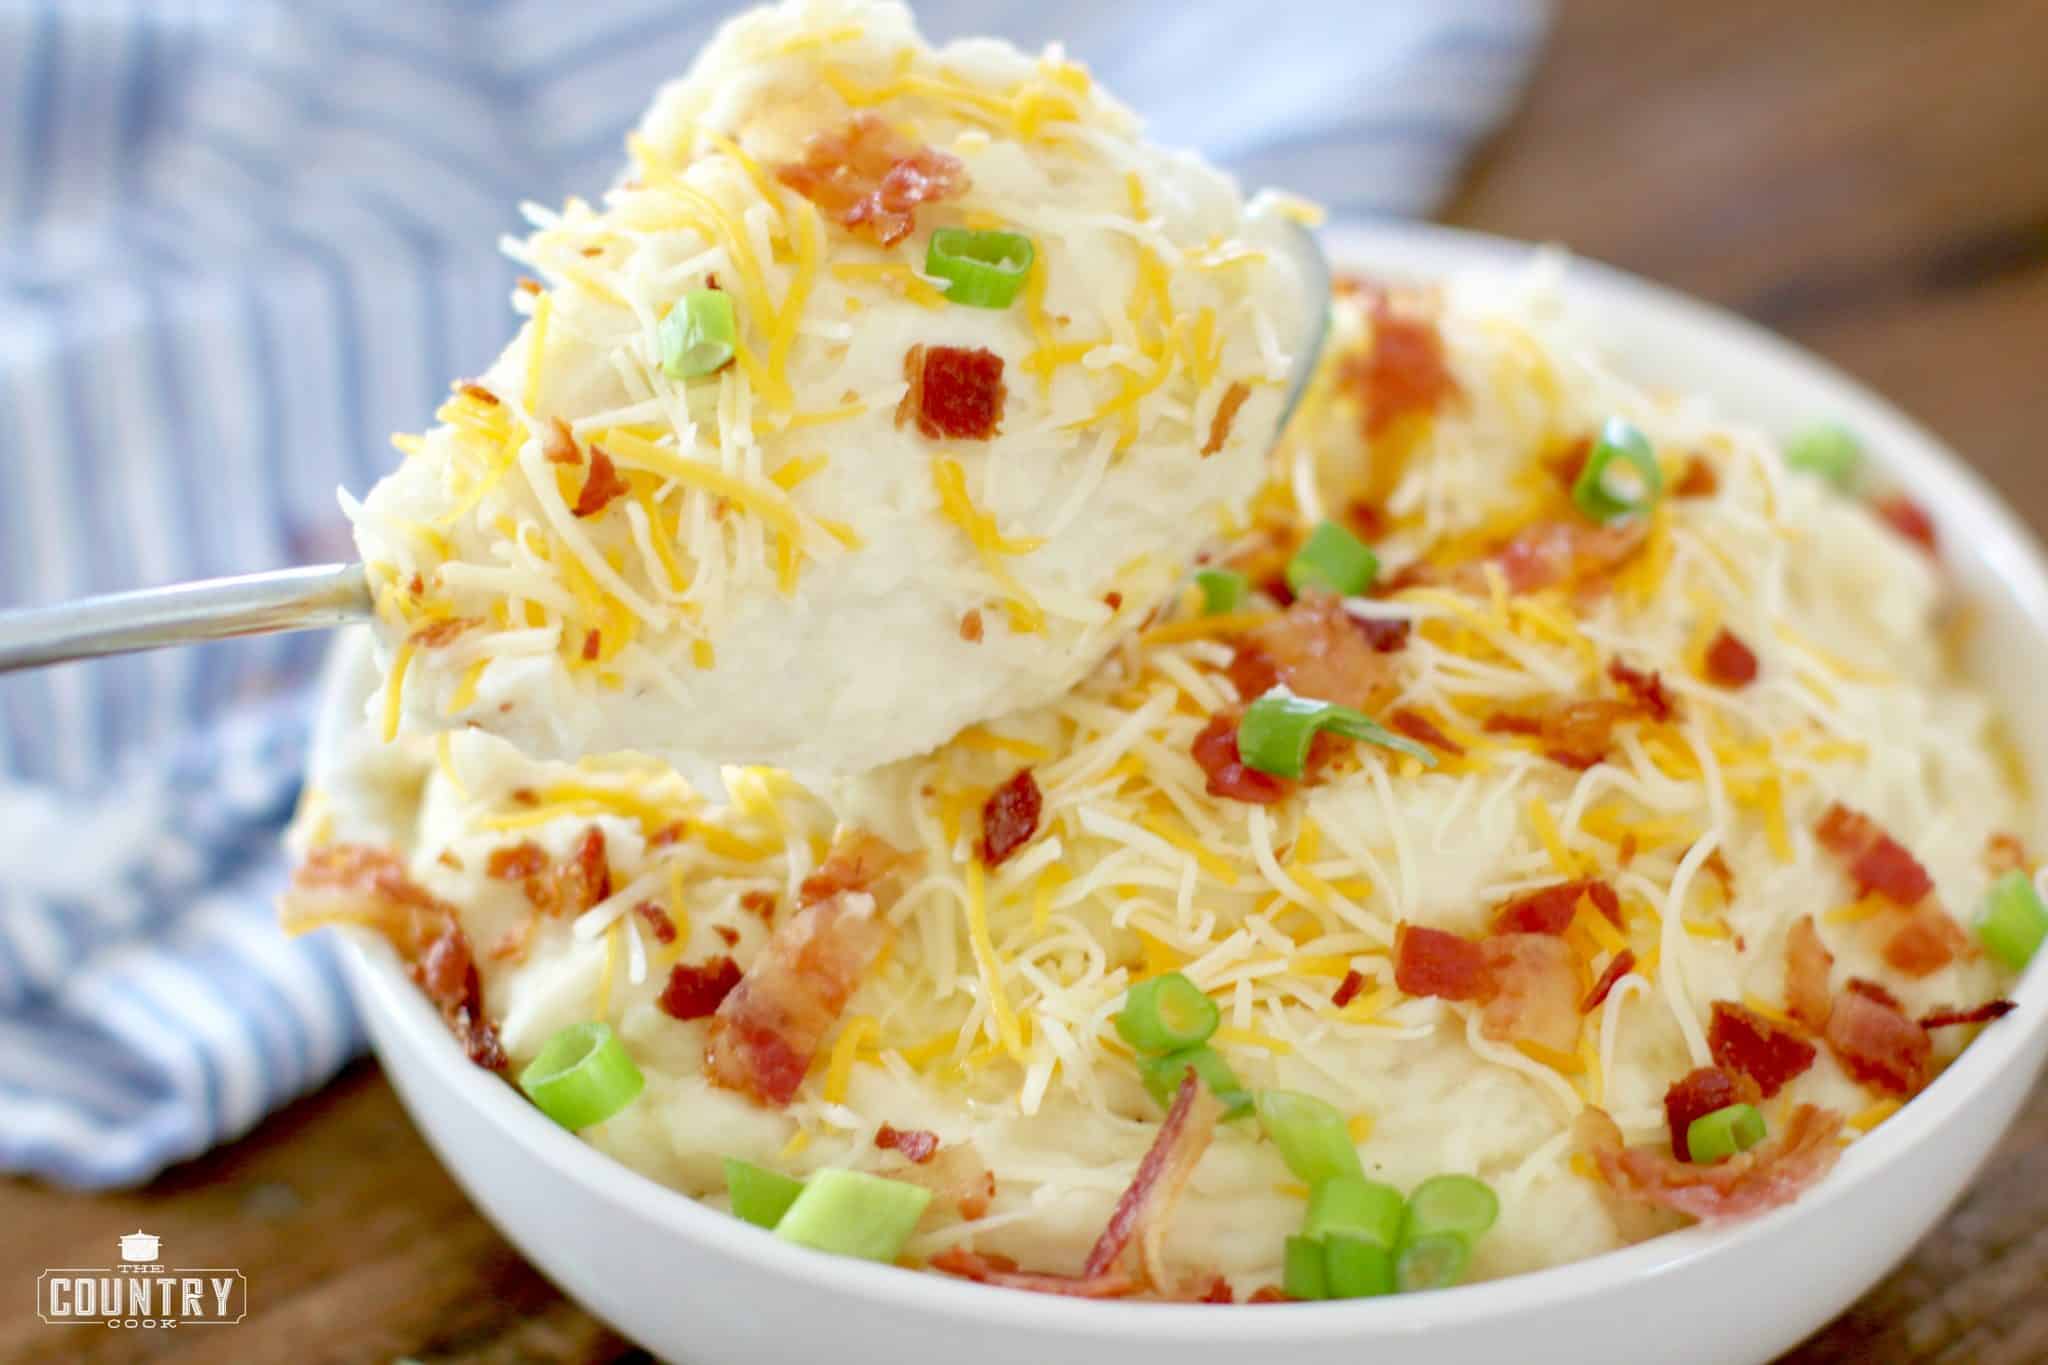 mashed potatoes topped with diced bacon, shredded cheddar cheese and sliced green onions.